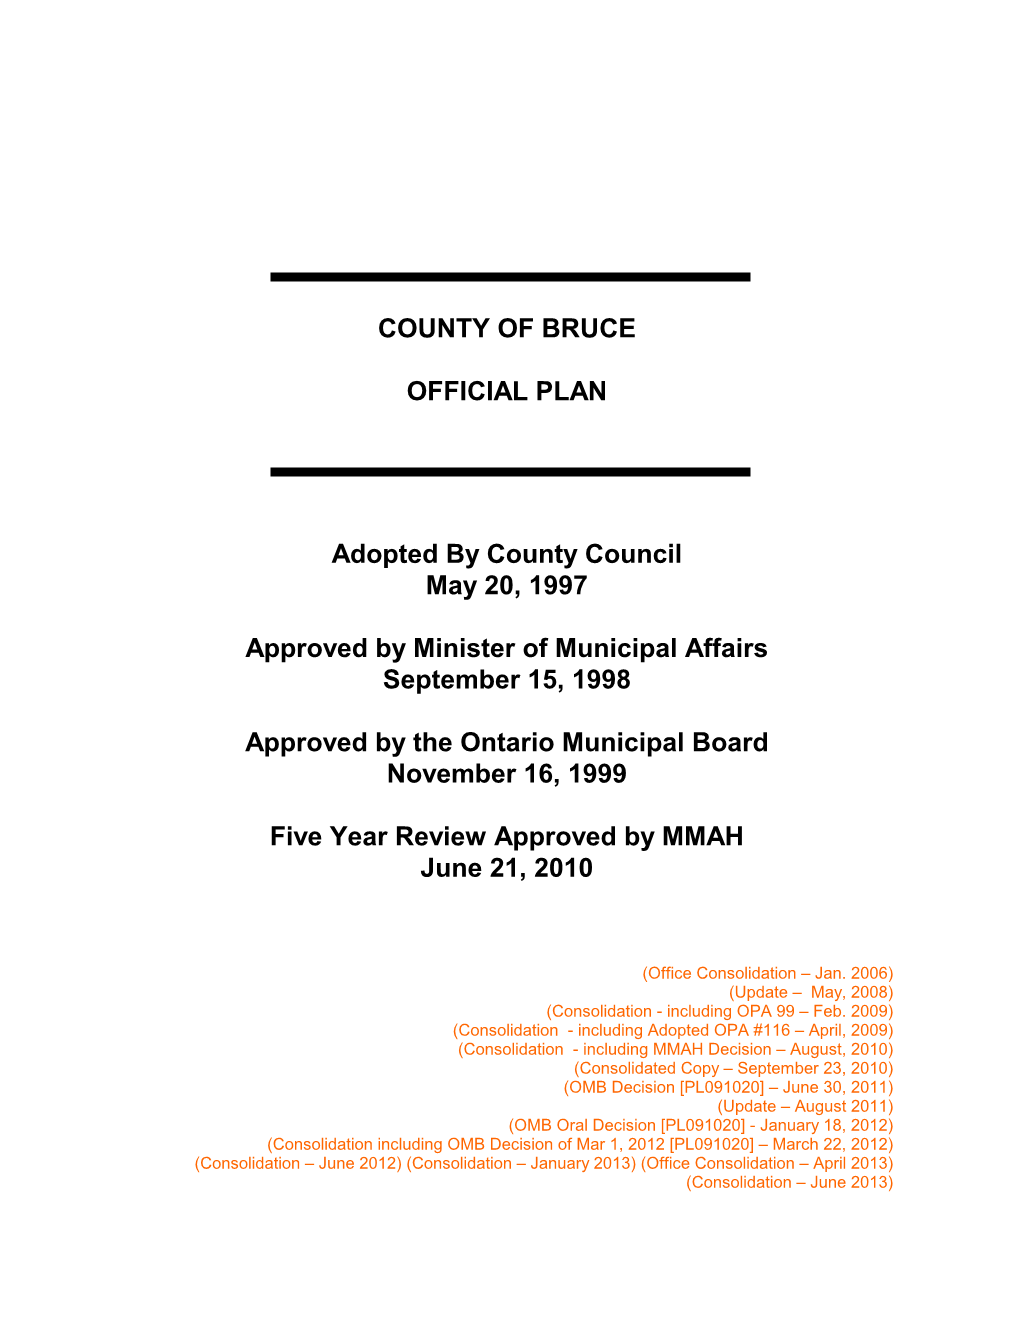 County of Bruce Official Plan